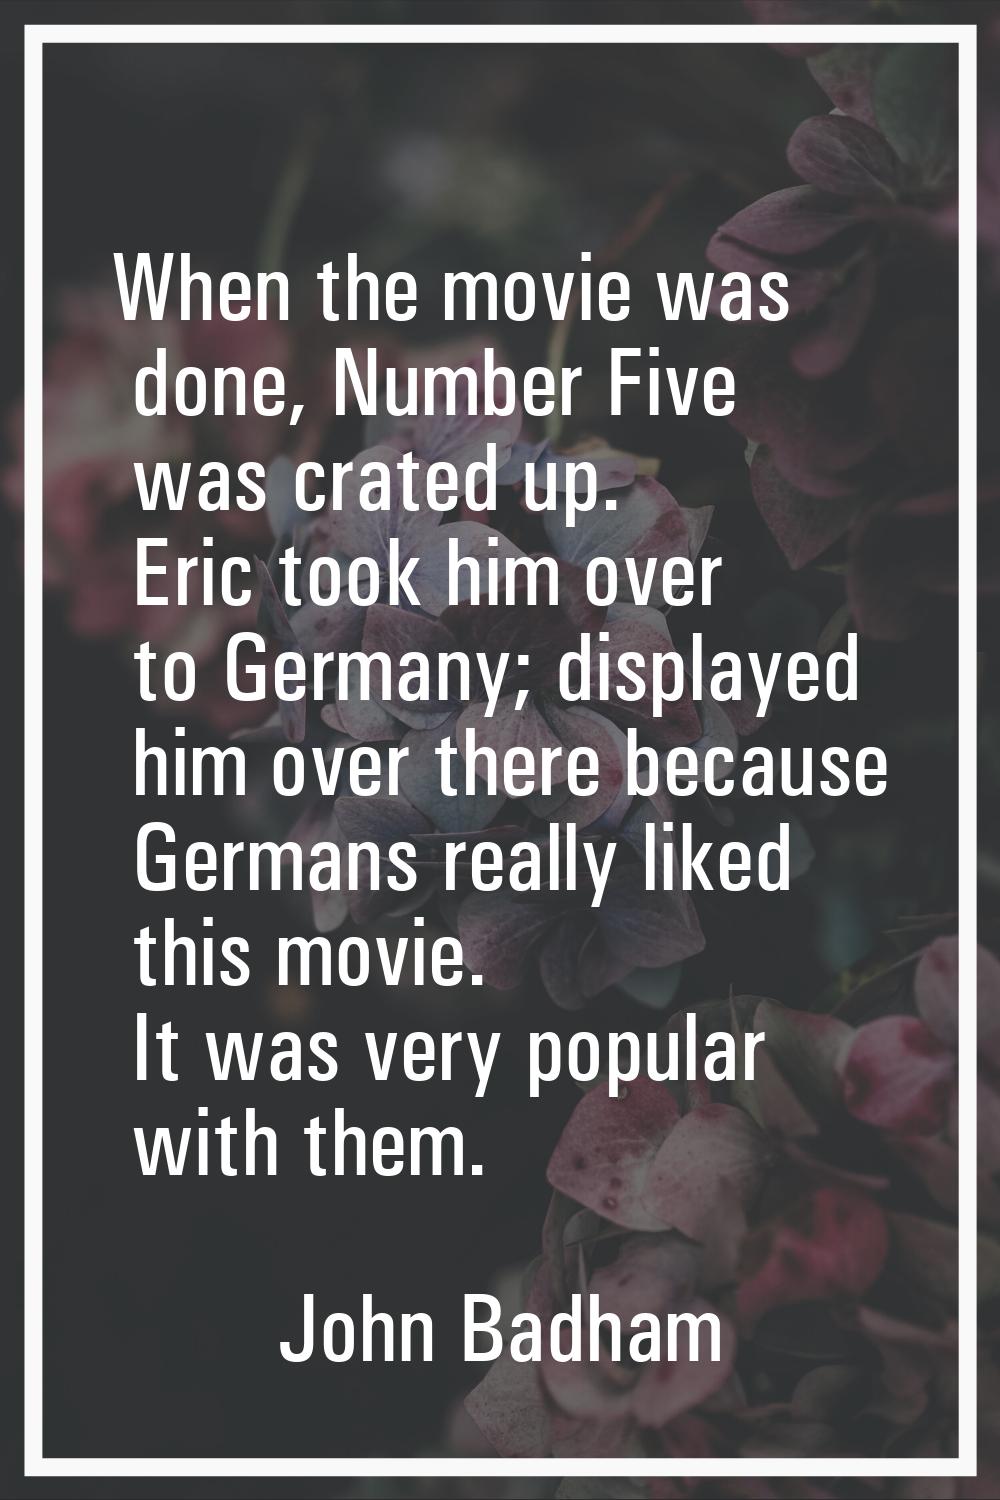 When the movie was done, Number Five was crated up. Eric took him over to Germany; displayed him ov